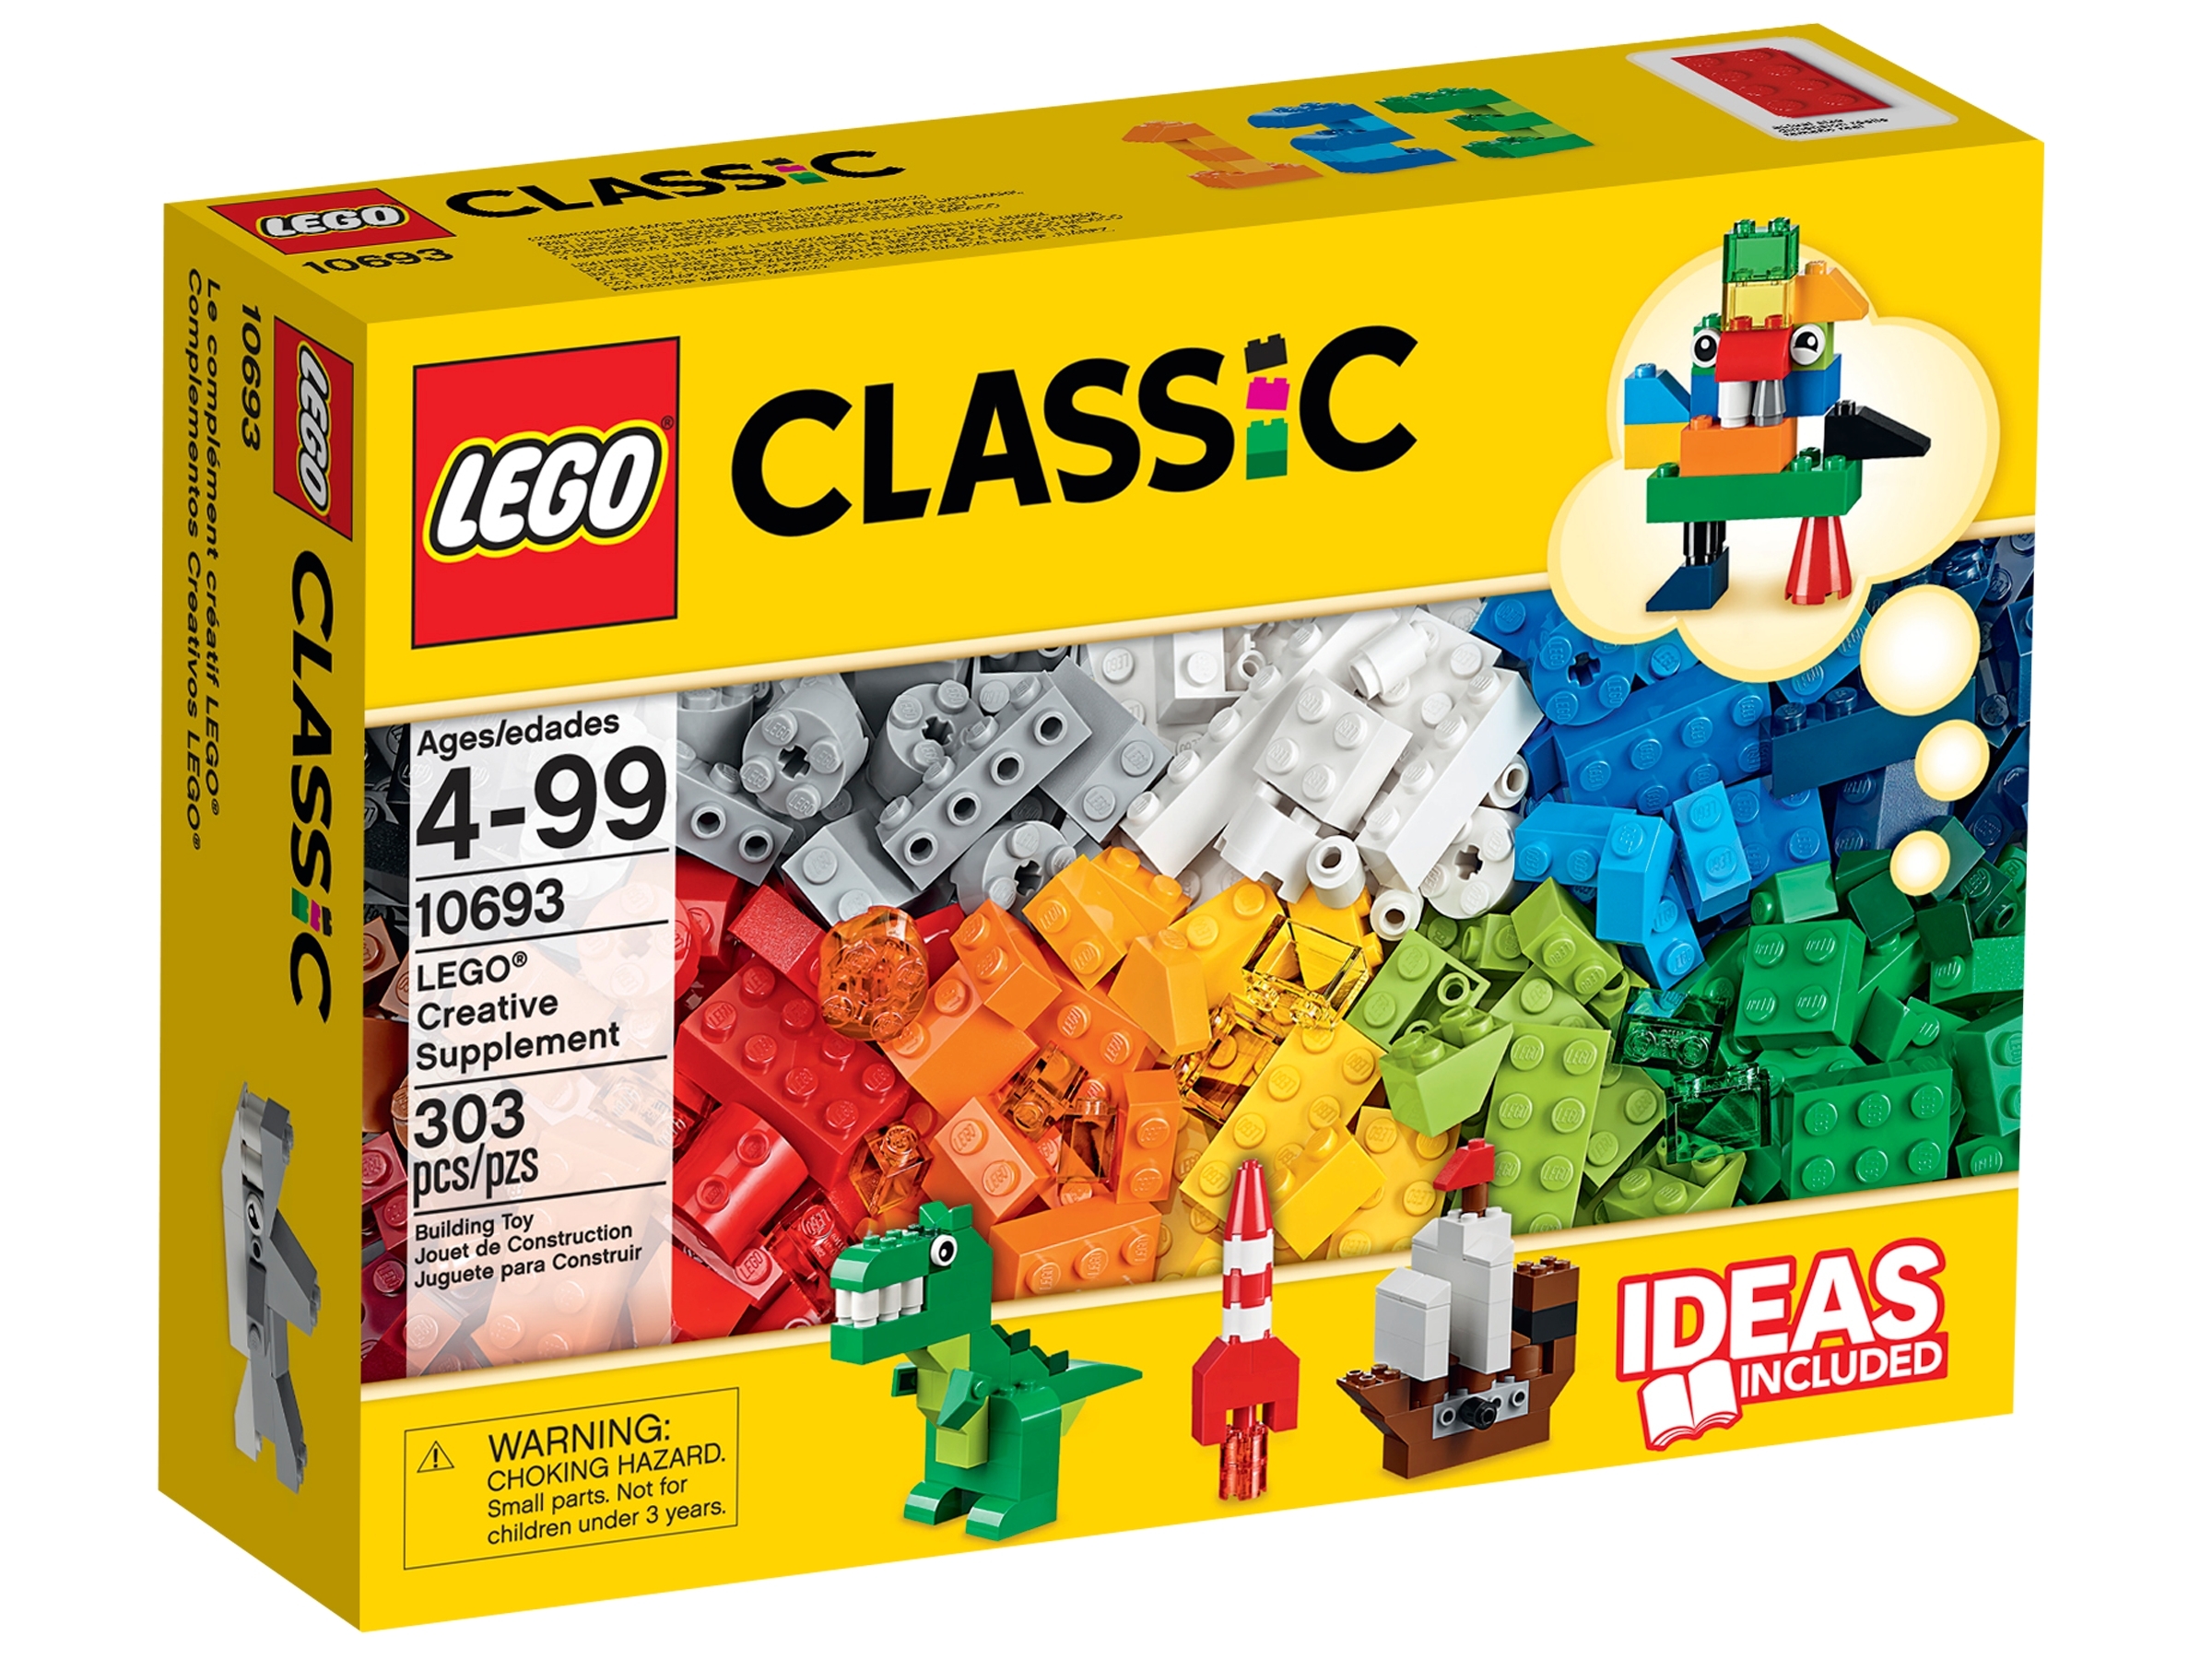 Creative Supplement 10693 | Classic online at the Official LEGO® Shop US